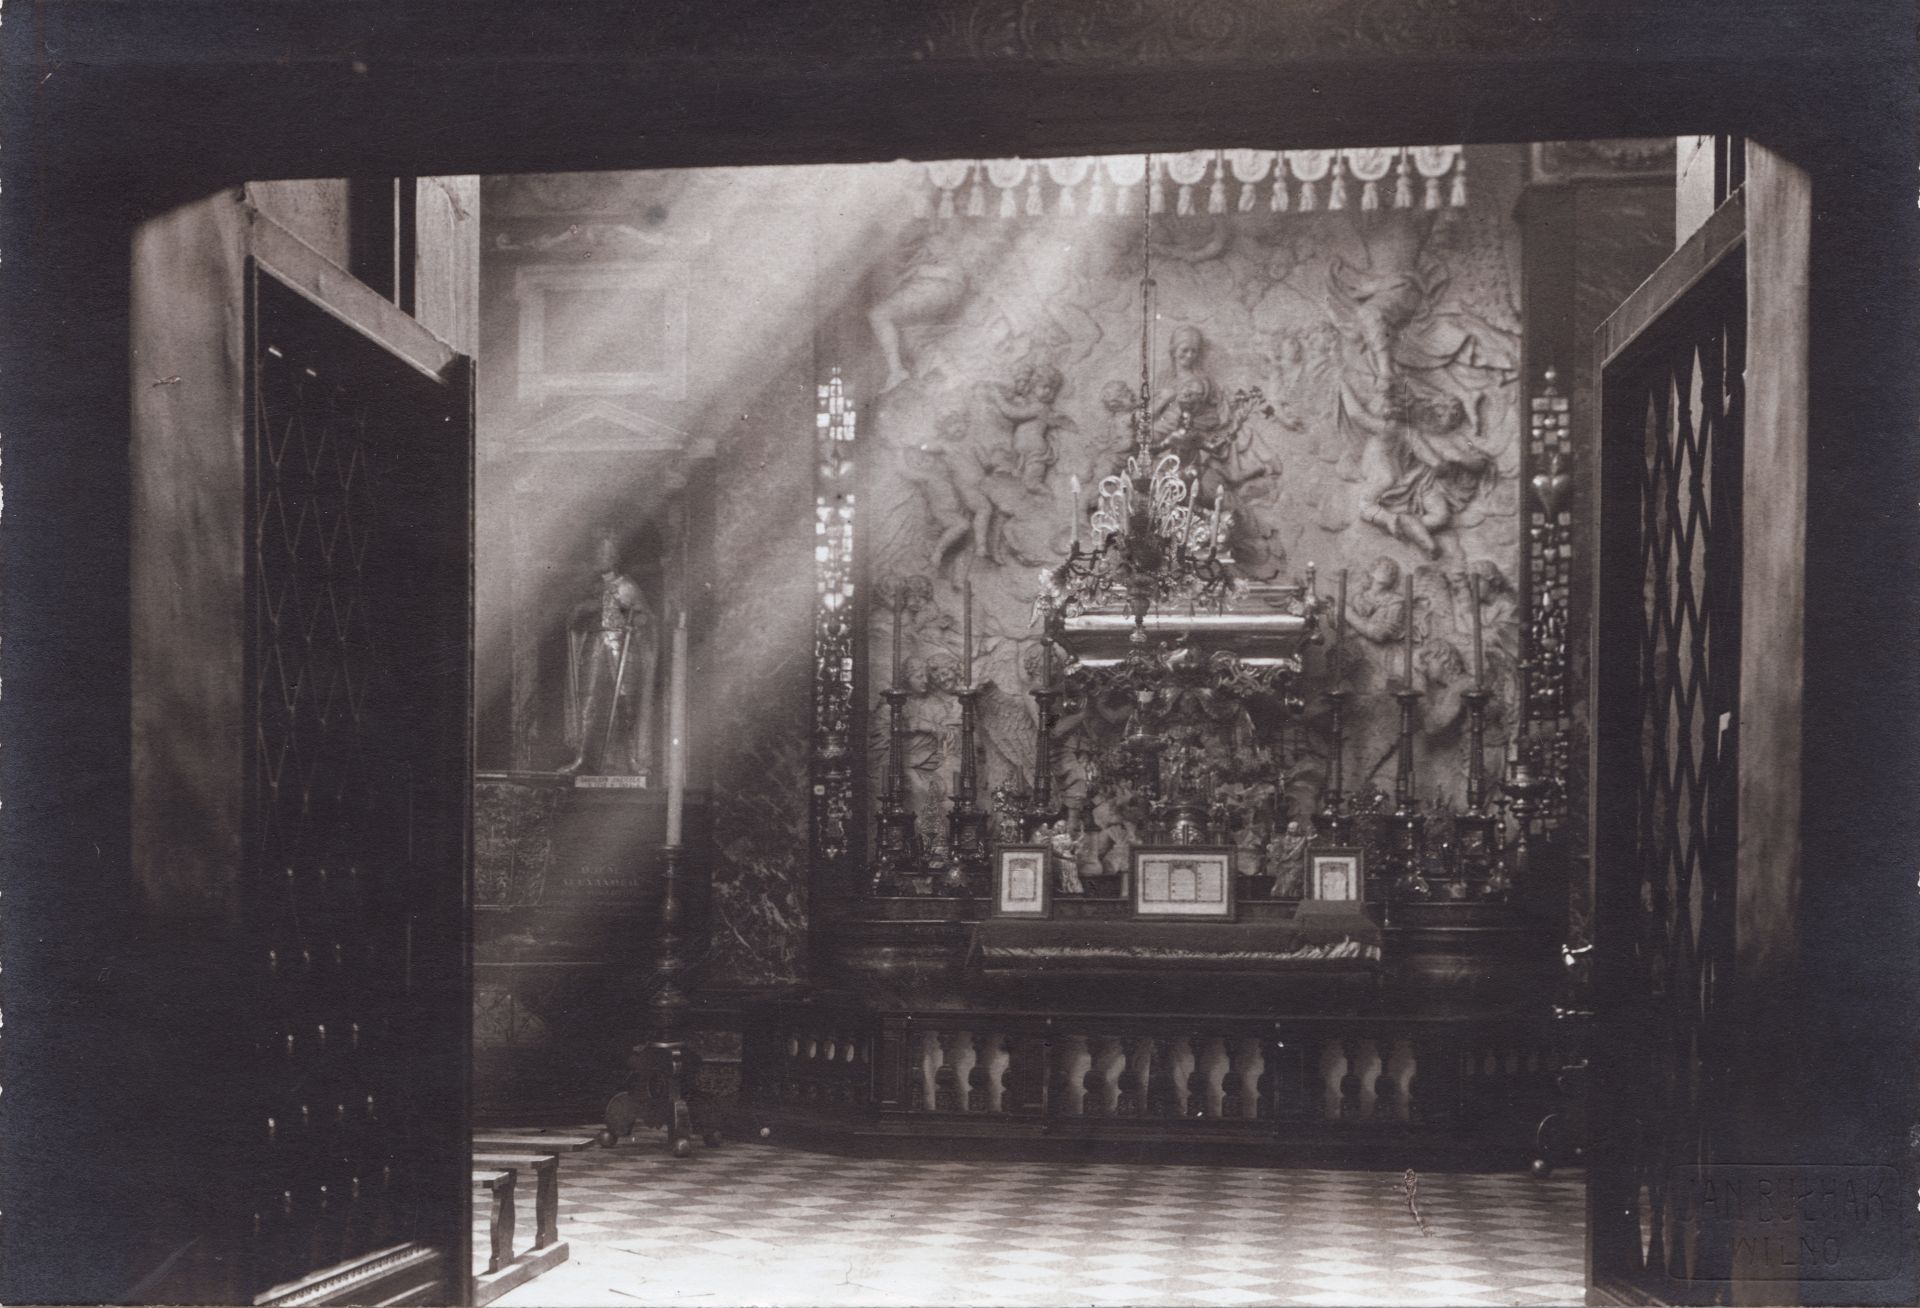 Chandelier at the Chapel of Saint Casimir of the Cathedral Basilica of Vilnius. Photo by Jan Bułhak, 1931, in: Lietuvos dailės muziejus, inv. Nr. Fi-283